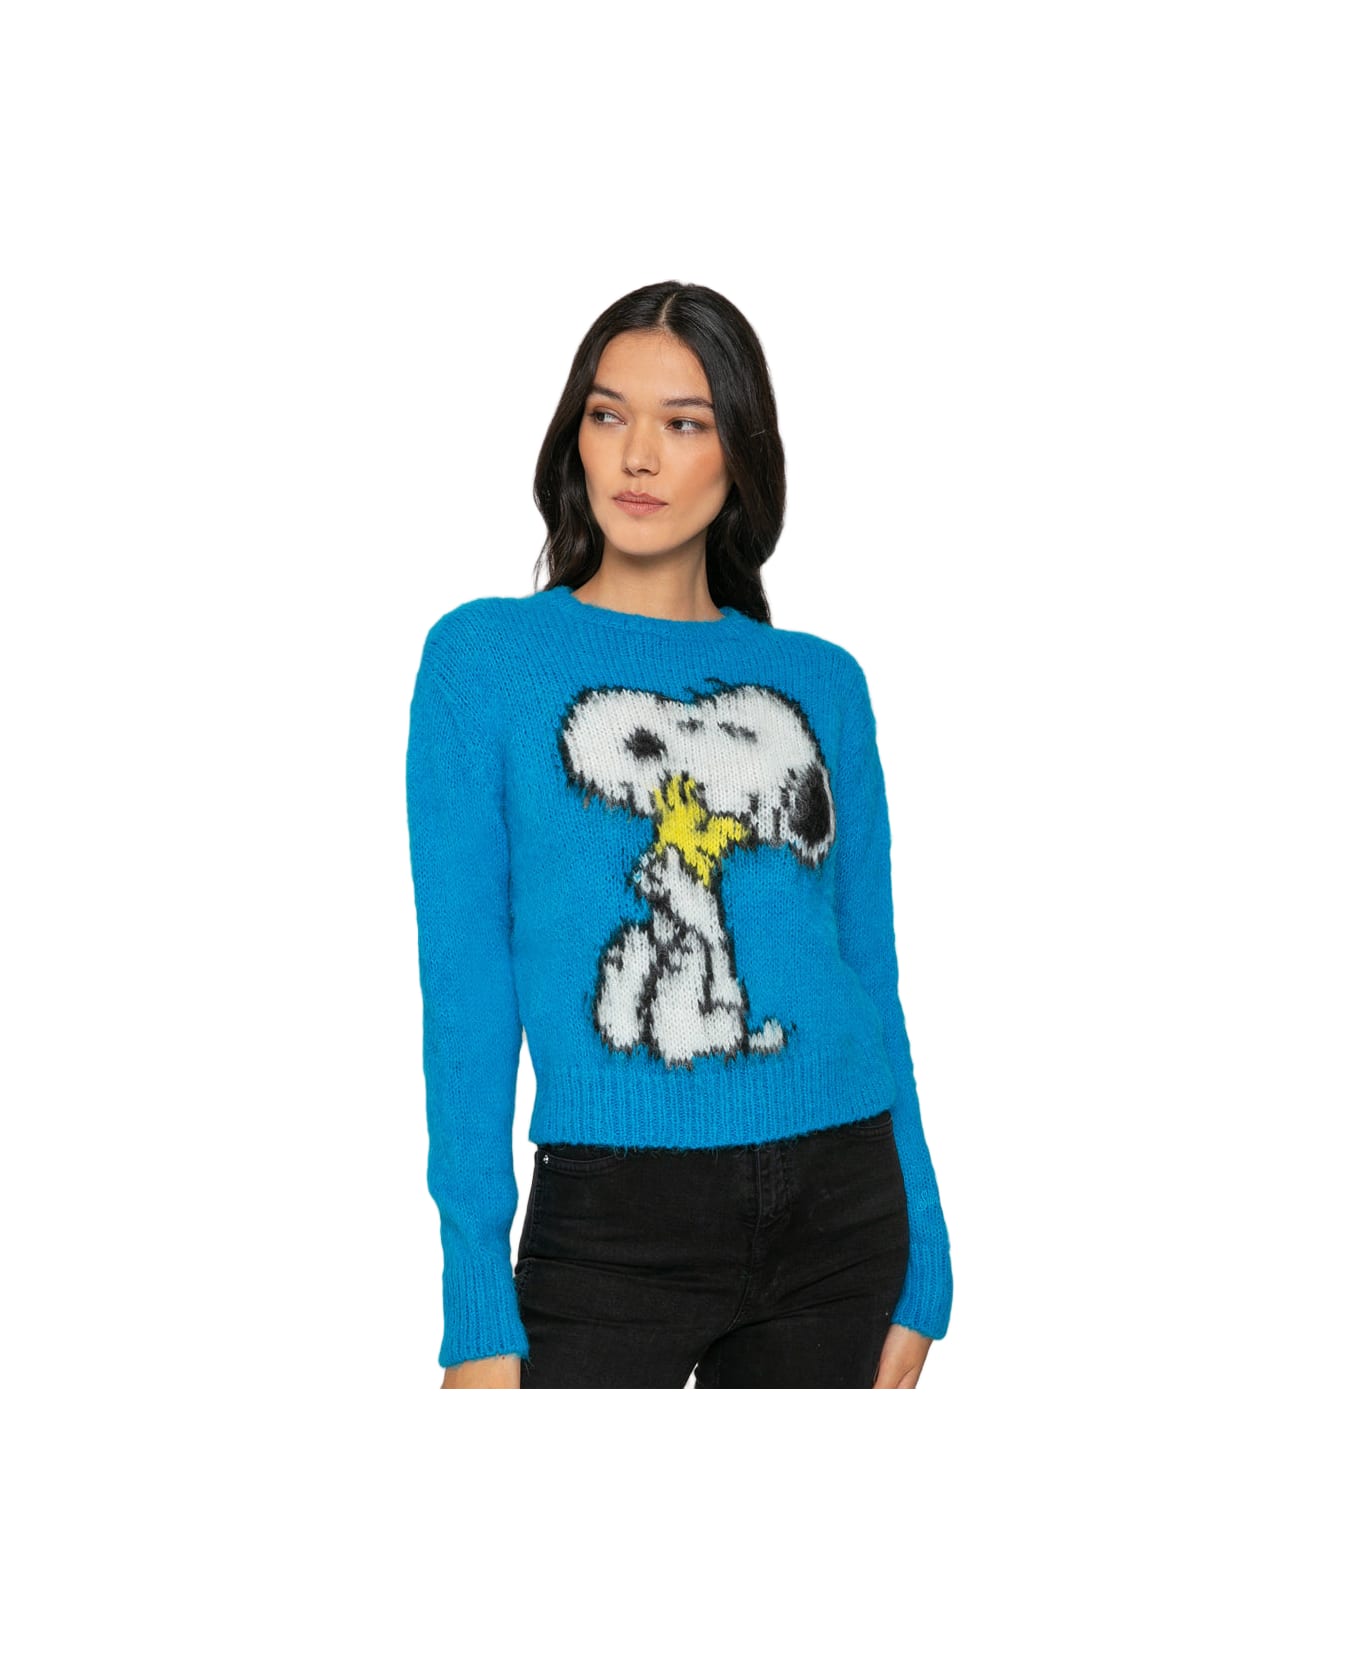 MC2 Saint Barth Woman Brushed Sweater With Snoopy Print | Snoopy - Peanuts Special Edition - BLUE